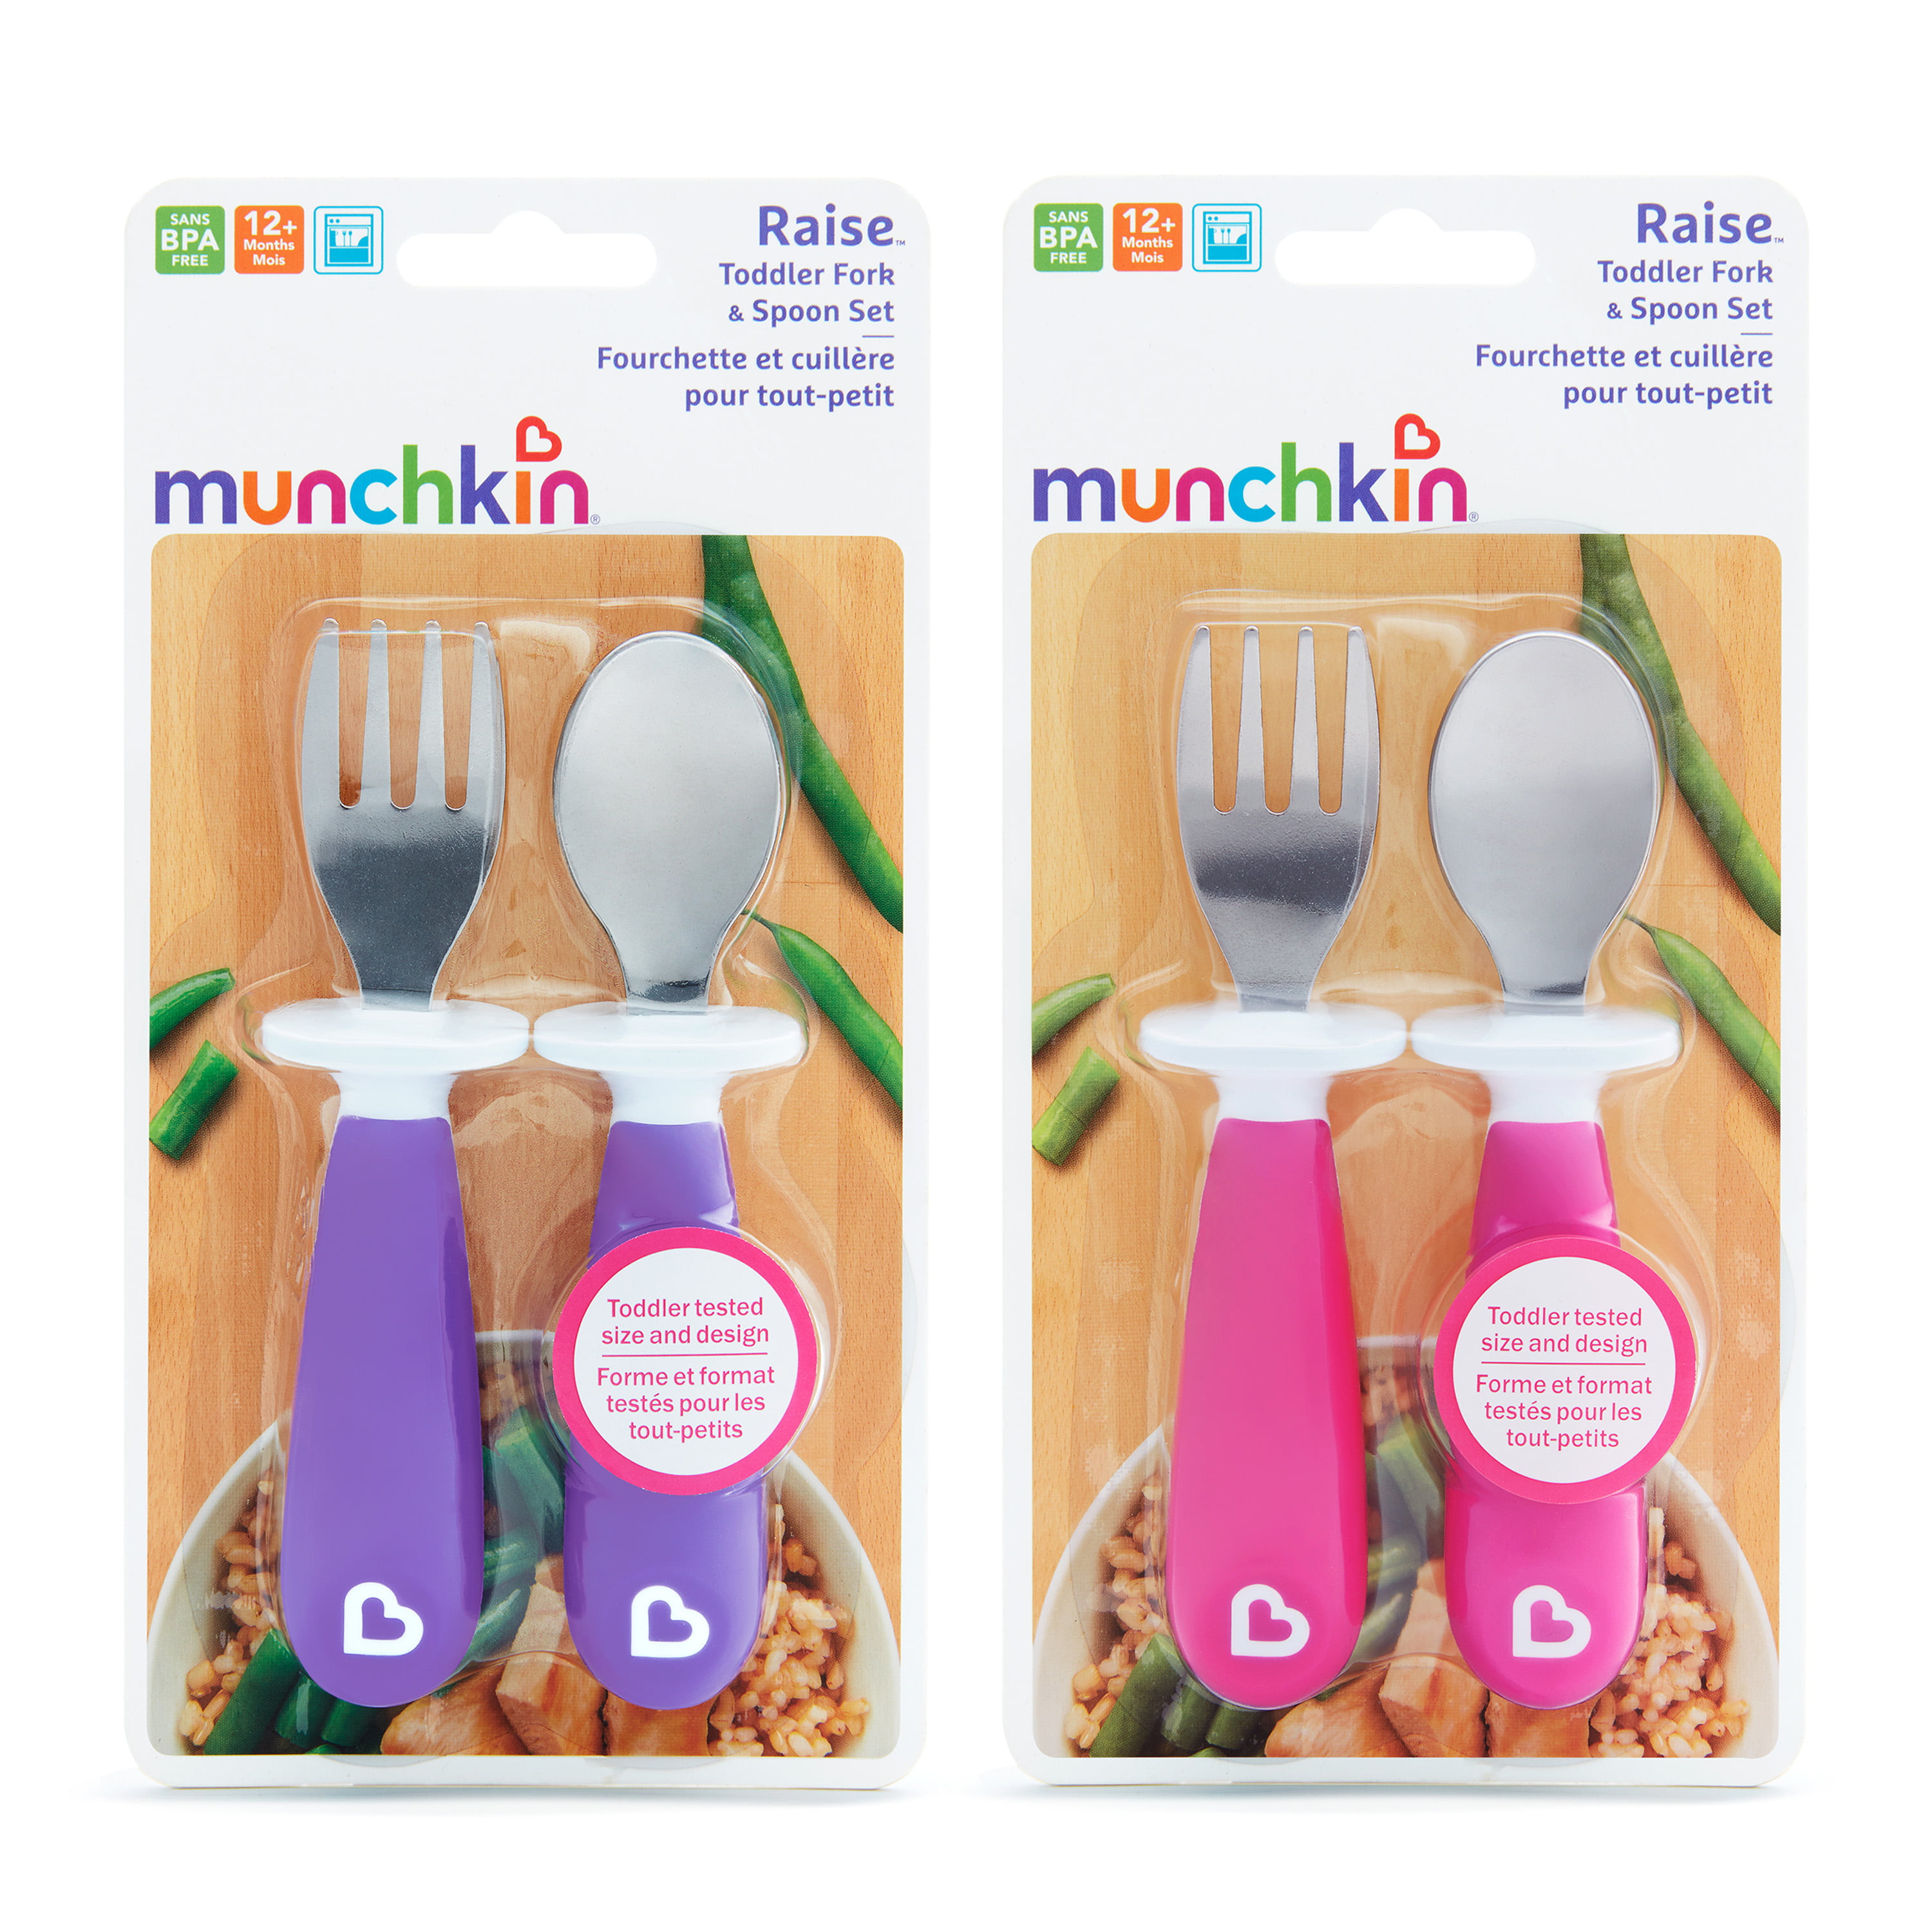 Munchkin Raise Toddler Fork and Spoon, 4 Pack, Pink/Purple, 12+